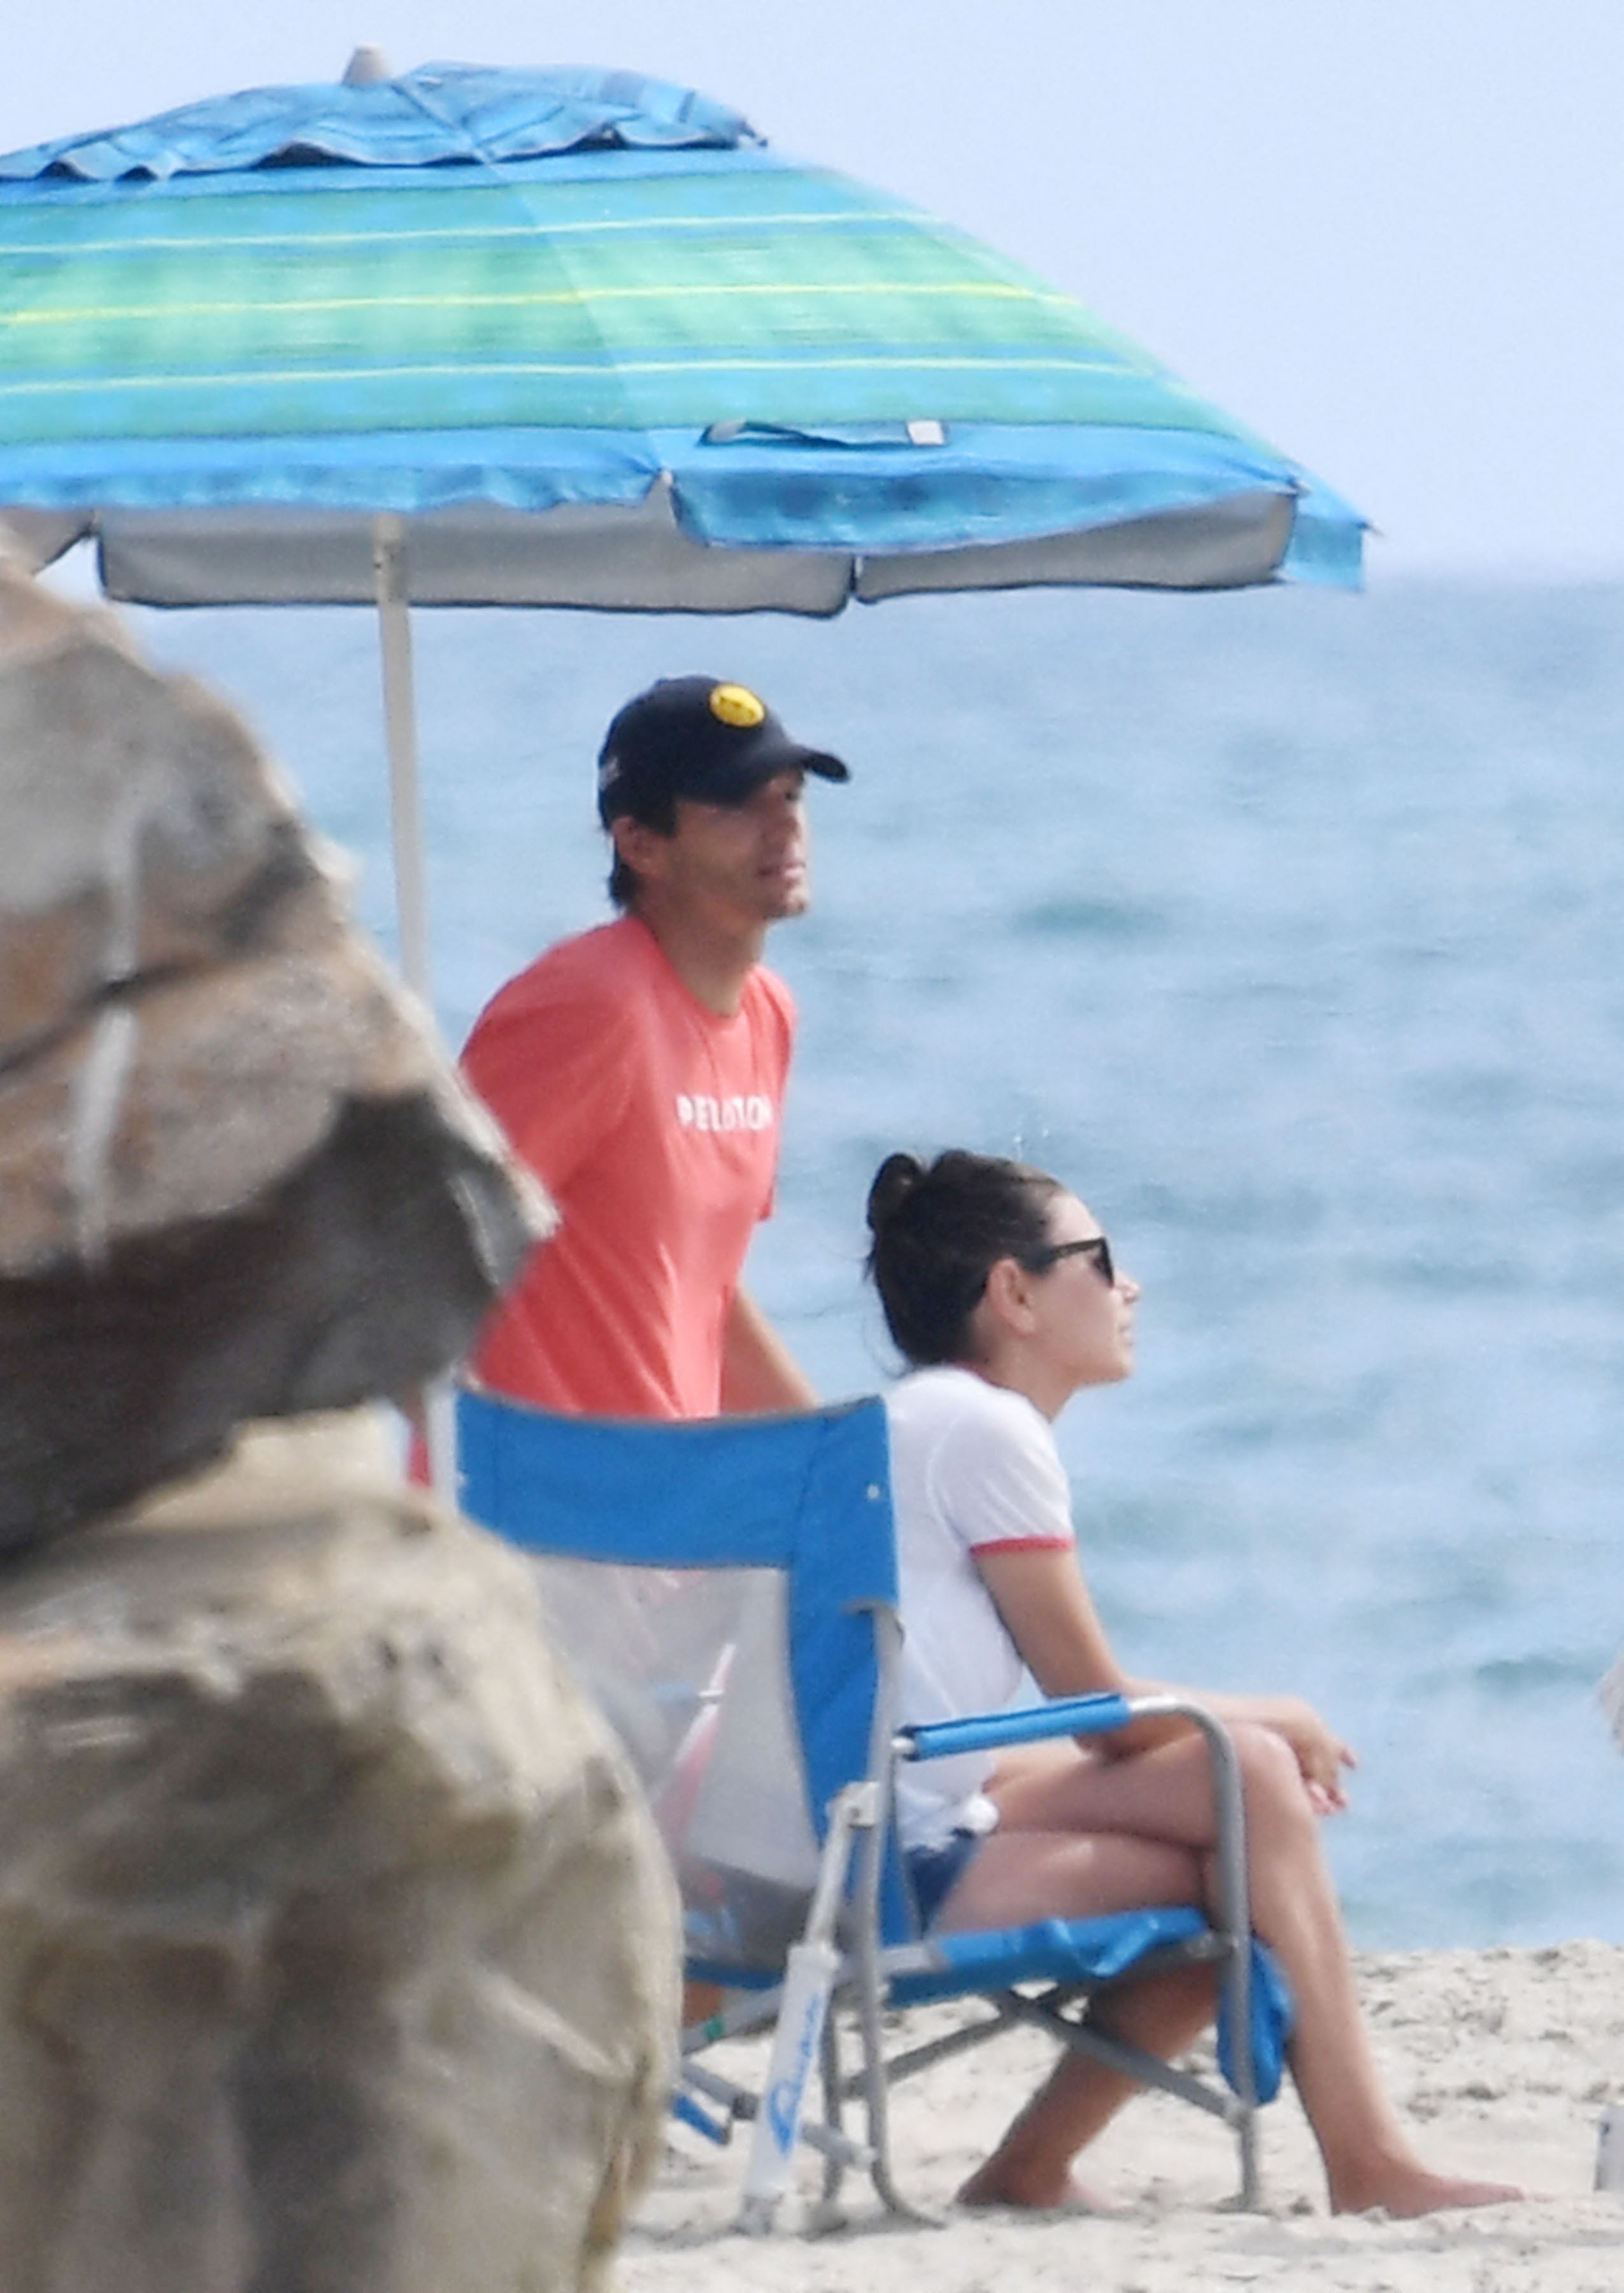 Ashton Kutcher and Mila Kunis at the beach (Photo: The Grosby Group)